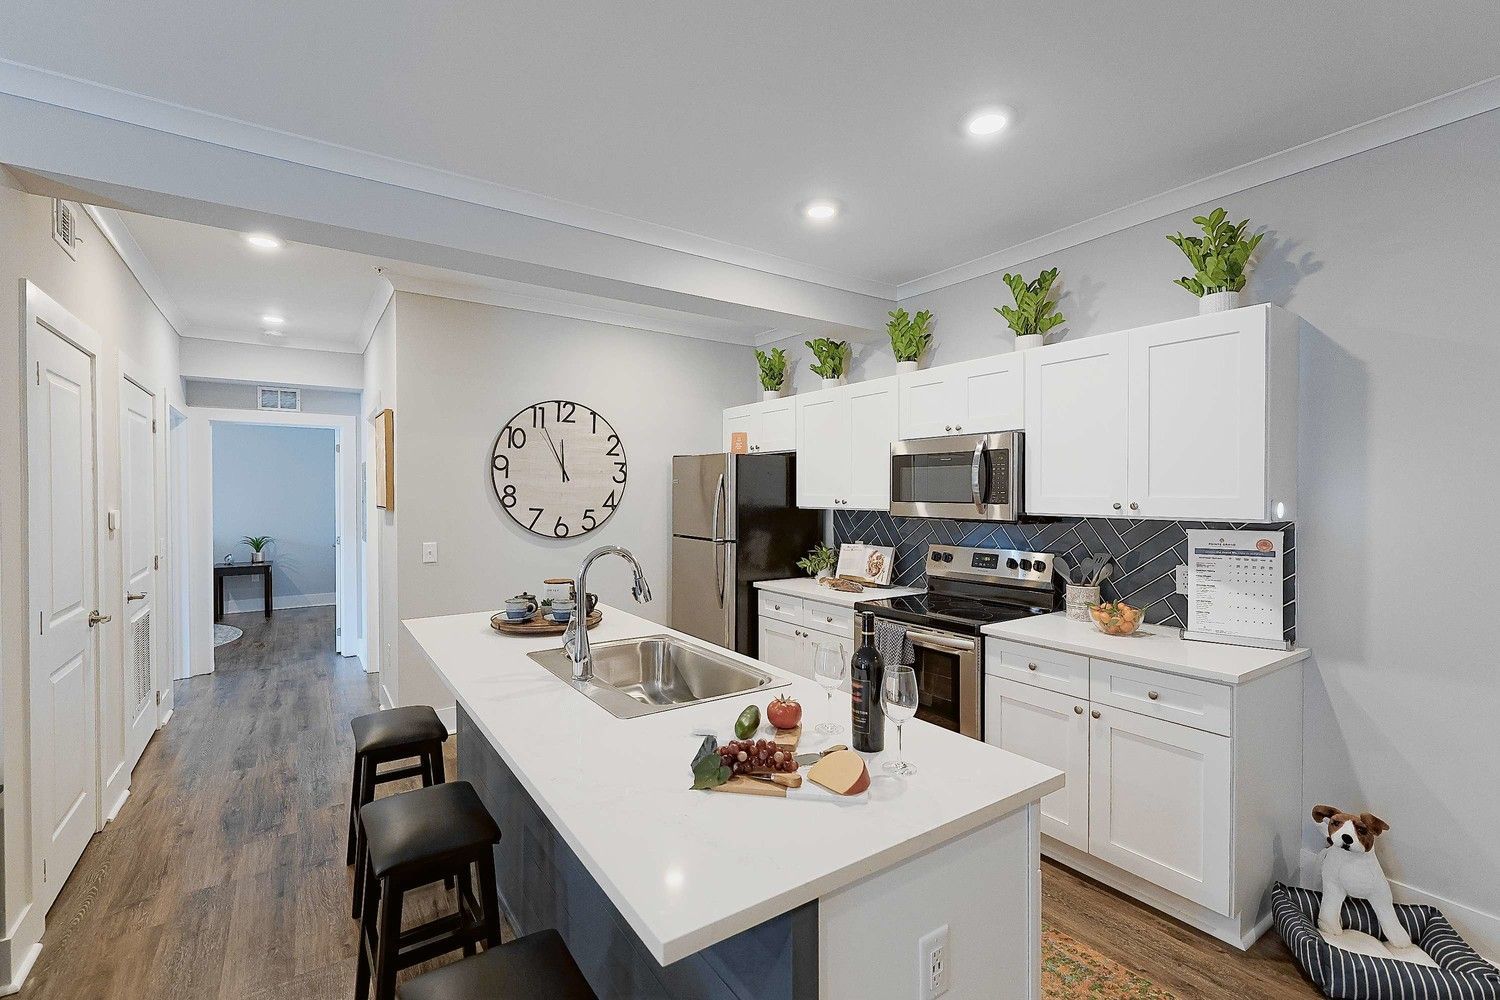 Apartment kitchen with white cabinets, stainless steel appliances, a sink, and a clock on the wall.